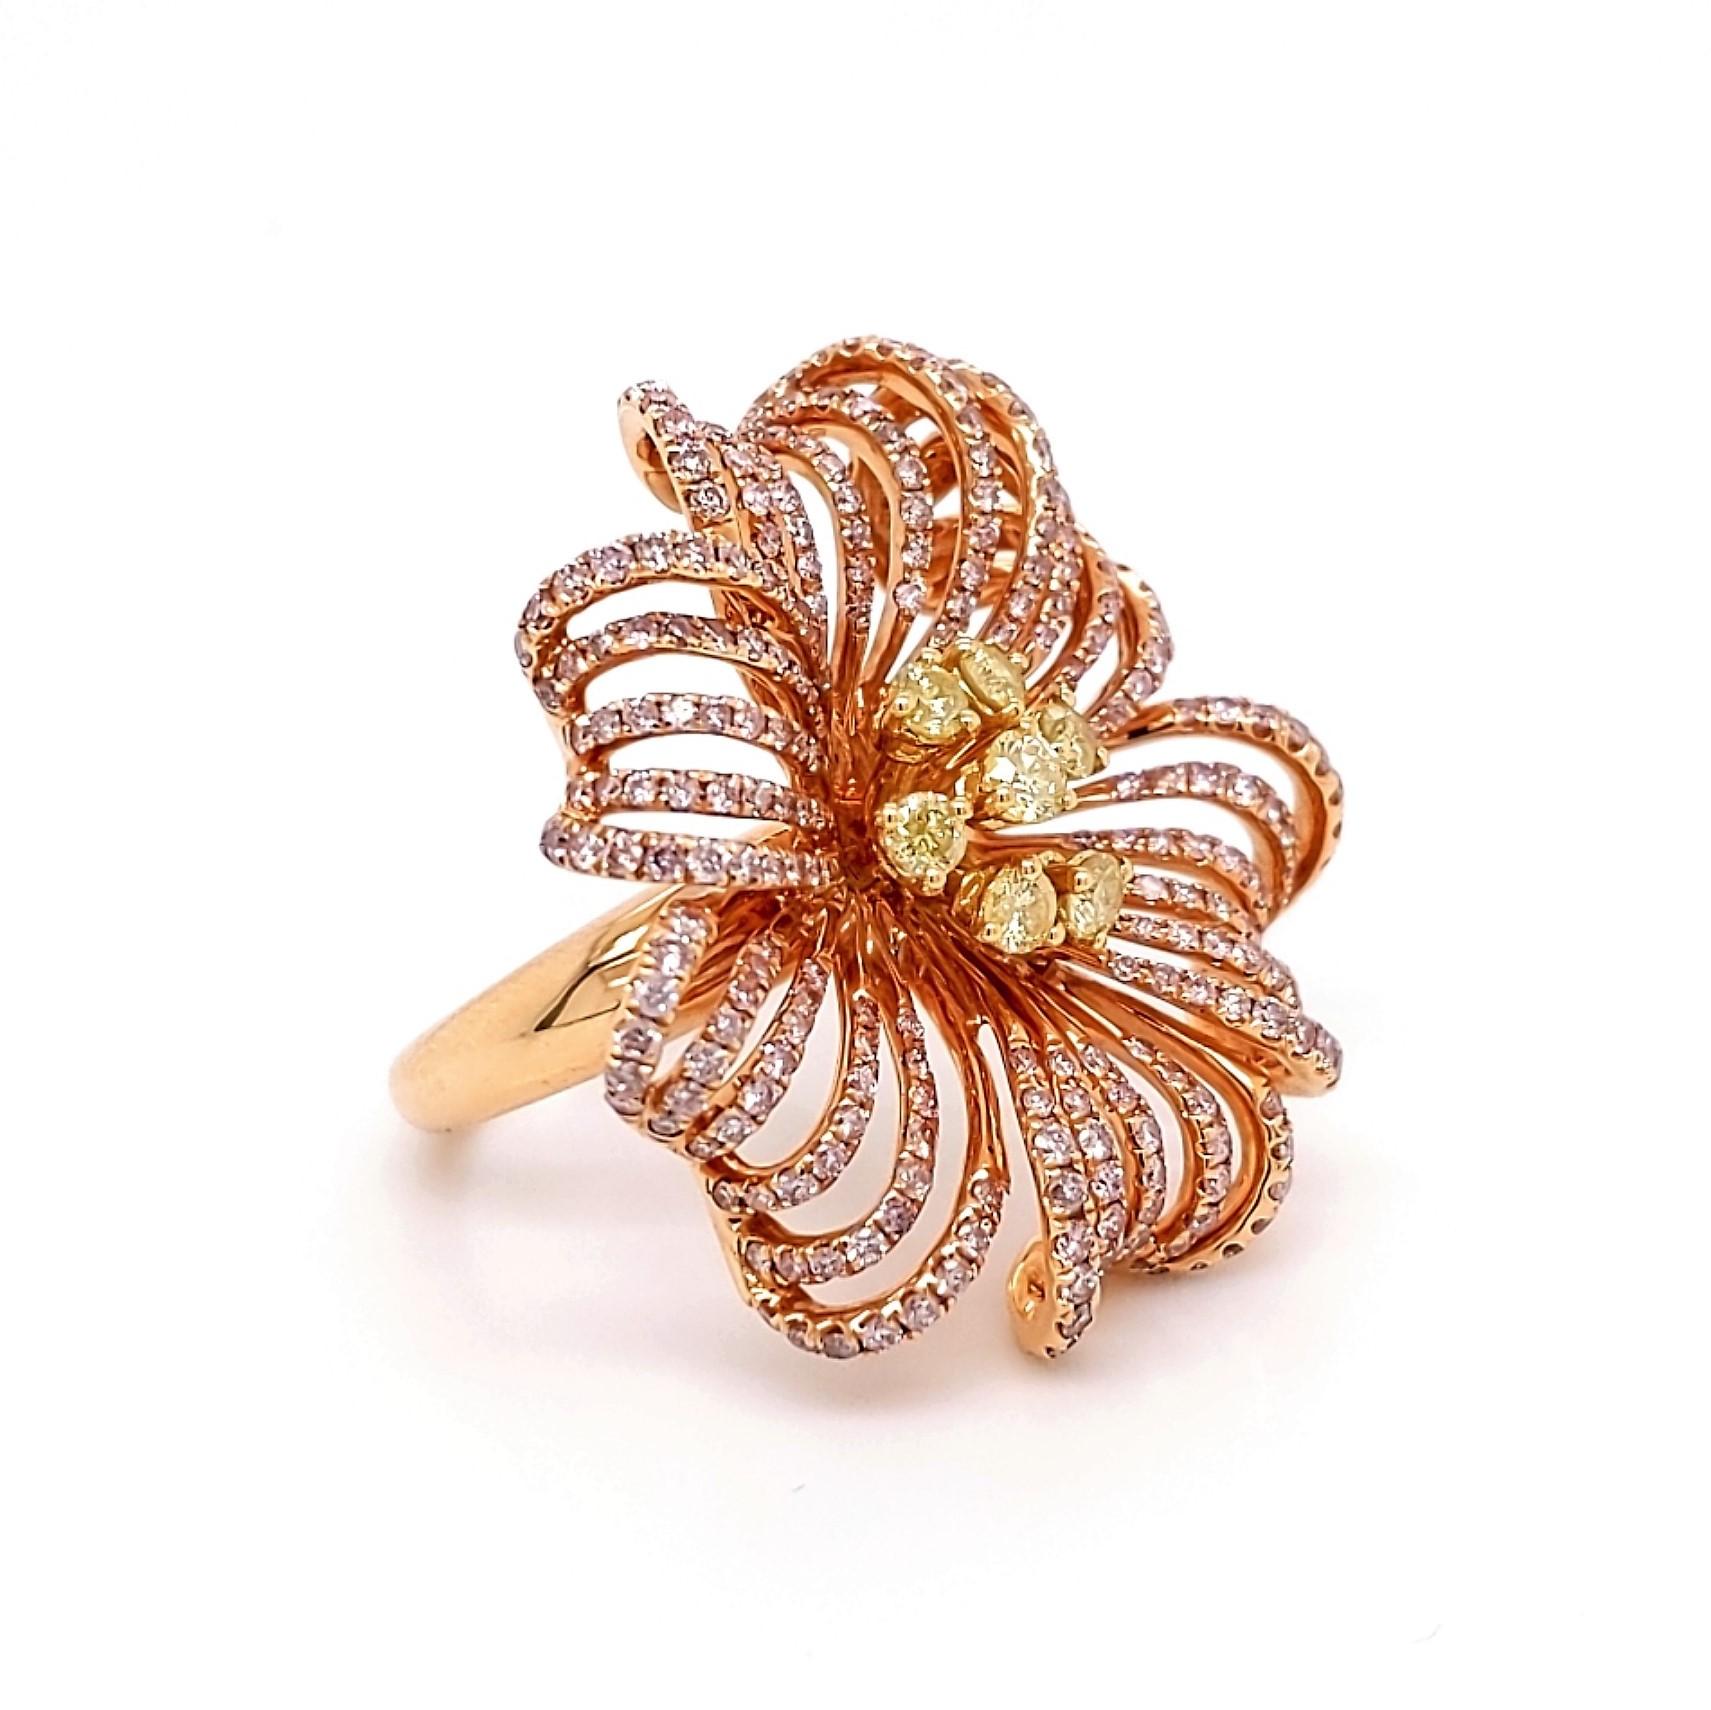 Stylish custom-made Flower Ring in 18k rose gold and 
Total Carat Weight: 2.58 Carats 
Pink Diamonds: 1.99 Carats (total 294 stones)
Yellow Diamonds: 0.59 Carats (total 7 stones)
Setting: 15.10 grams, 18k Rose Gold
